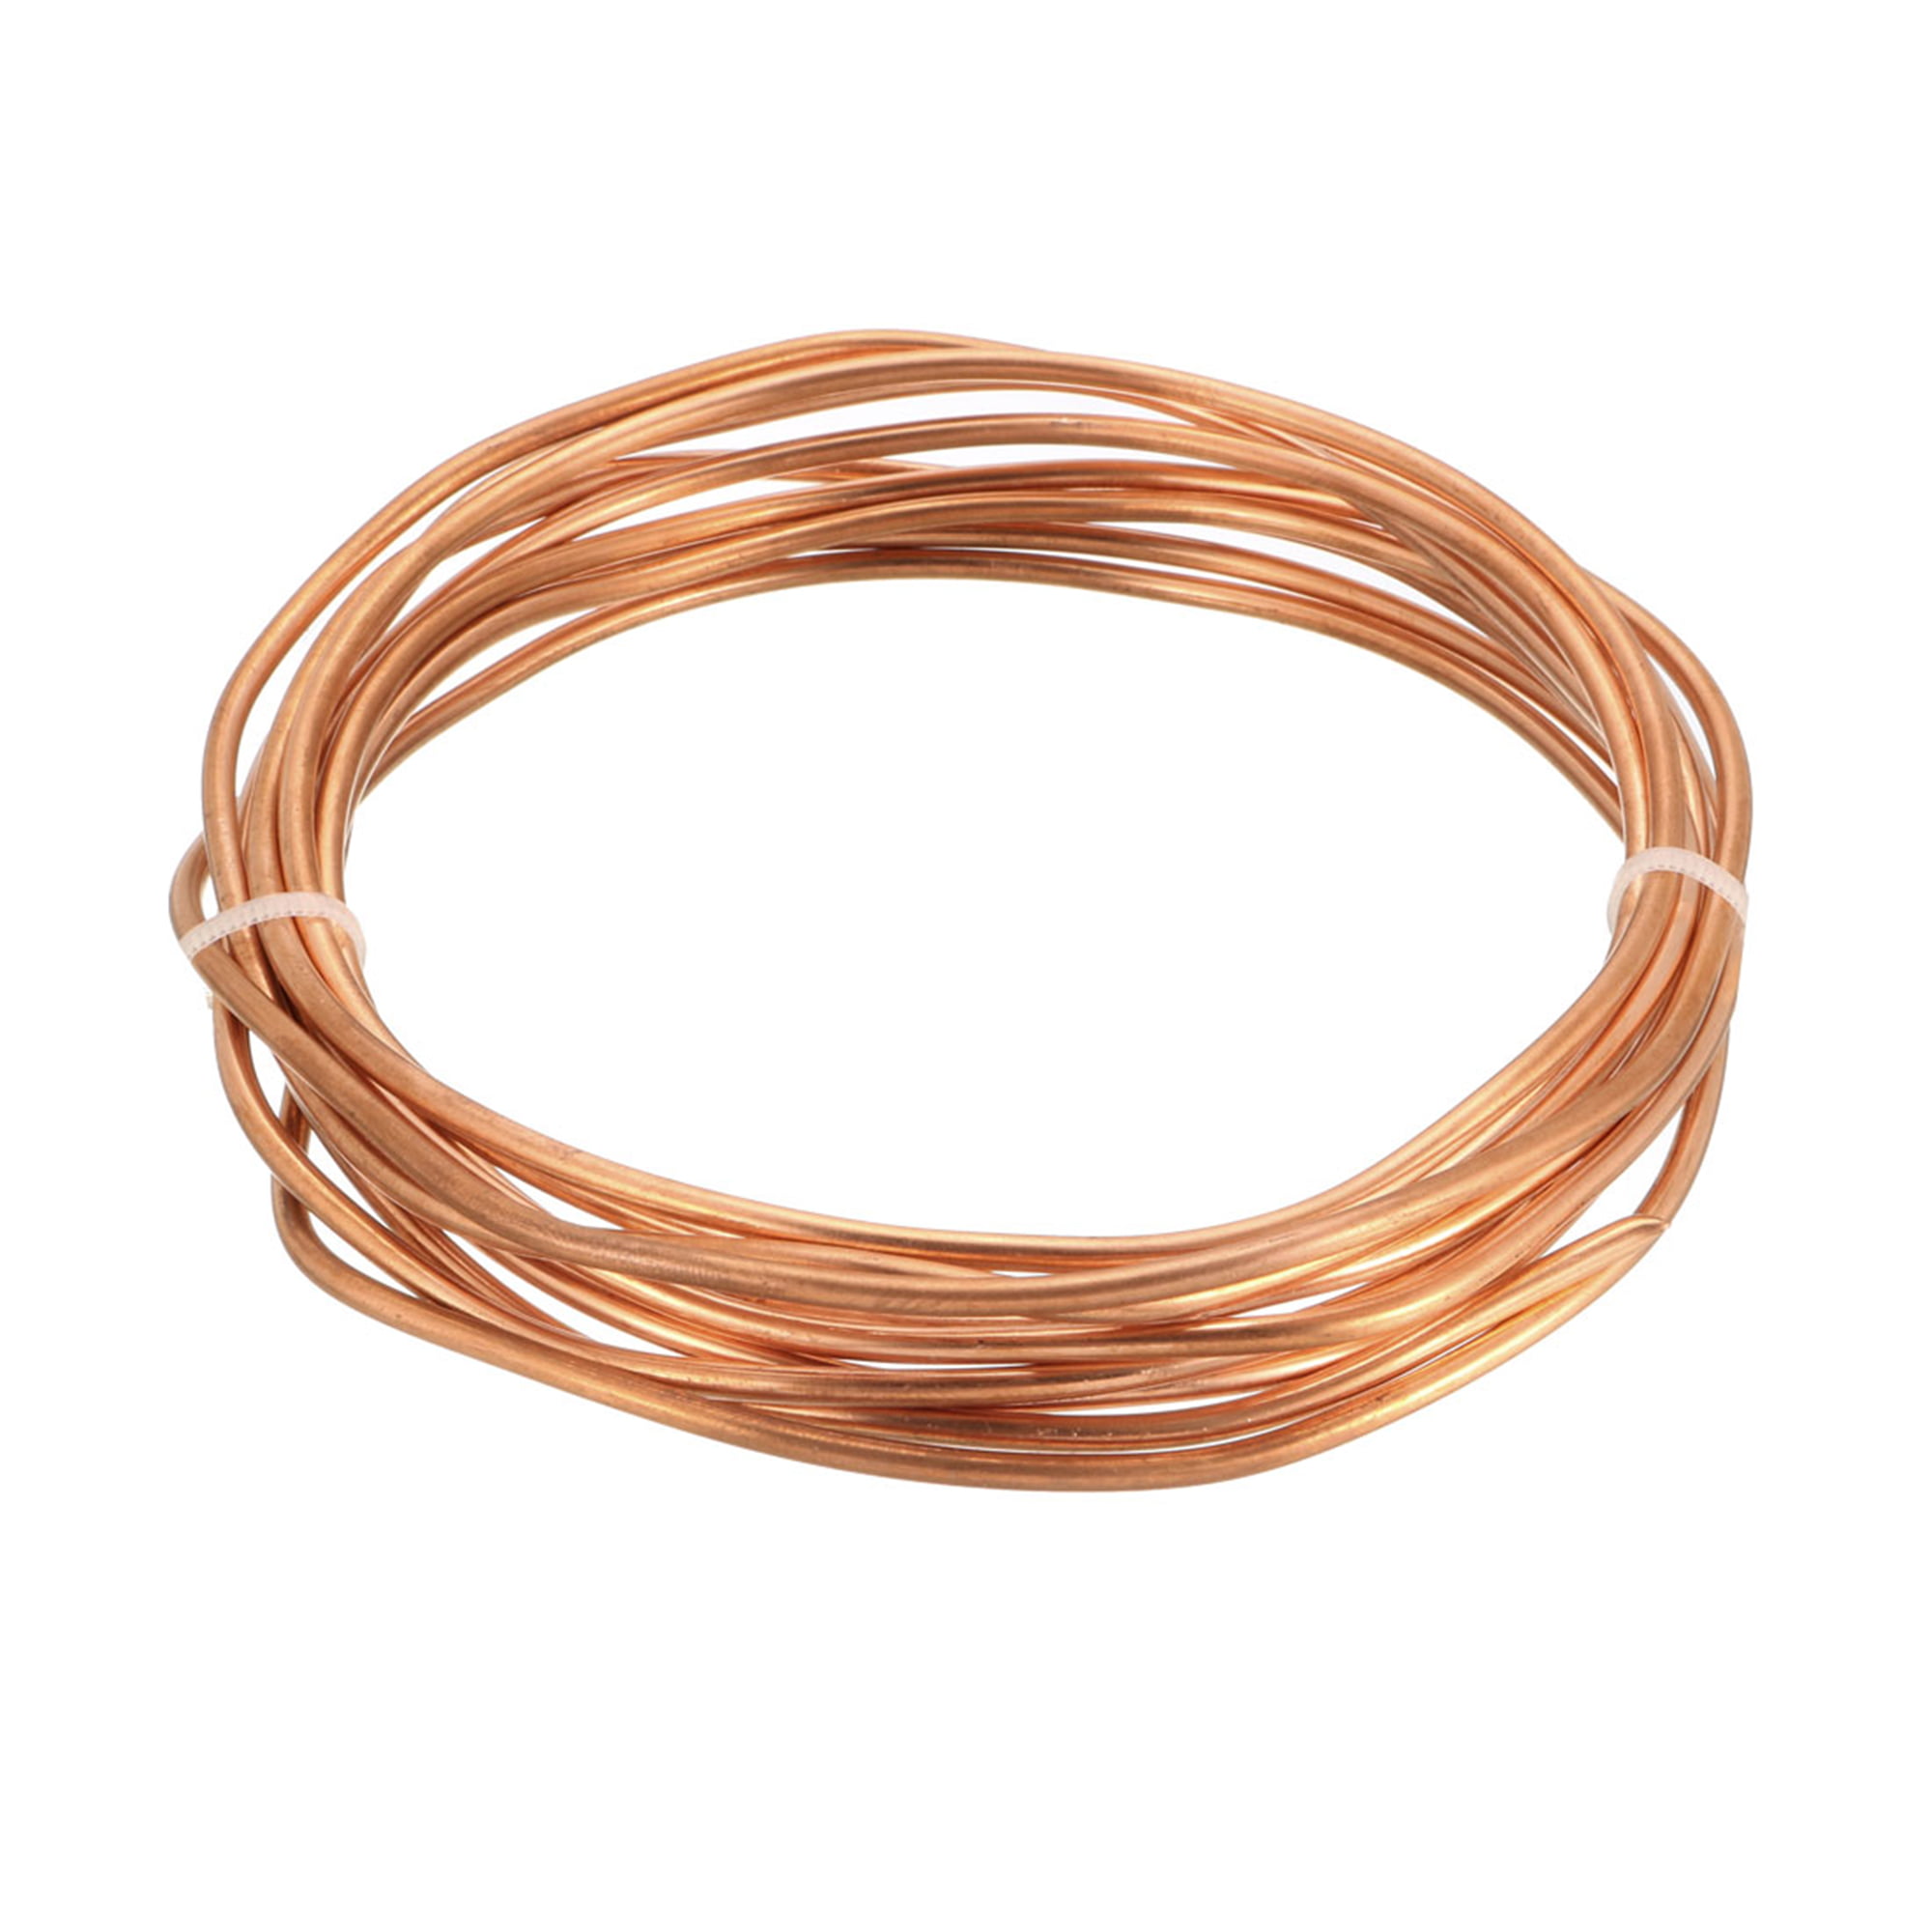 Refrigeration Tubing 3mm OD x 2mm ID x 24.5Ft Length Copper Tubing Coil 